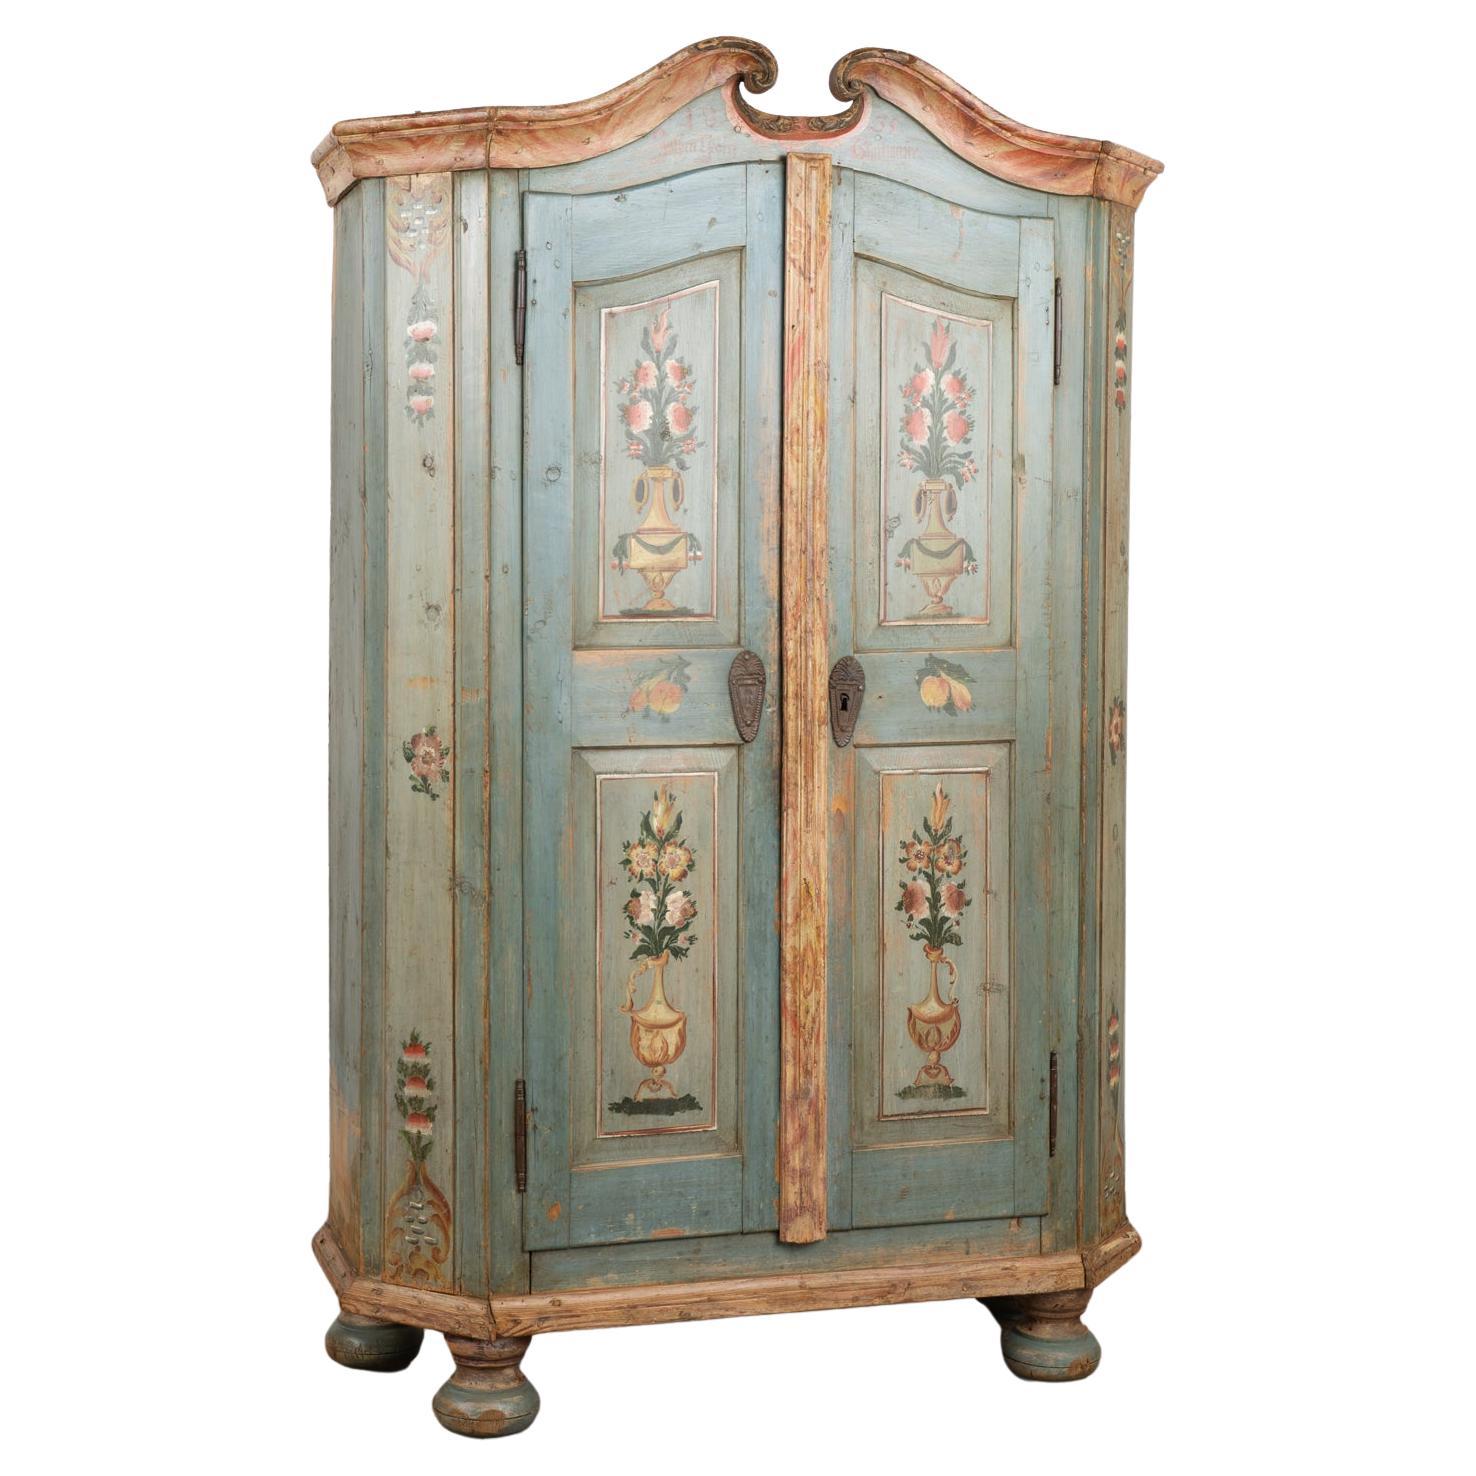 Original Blue Painted Pine Armoire, dated 1835